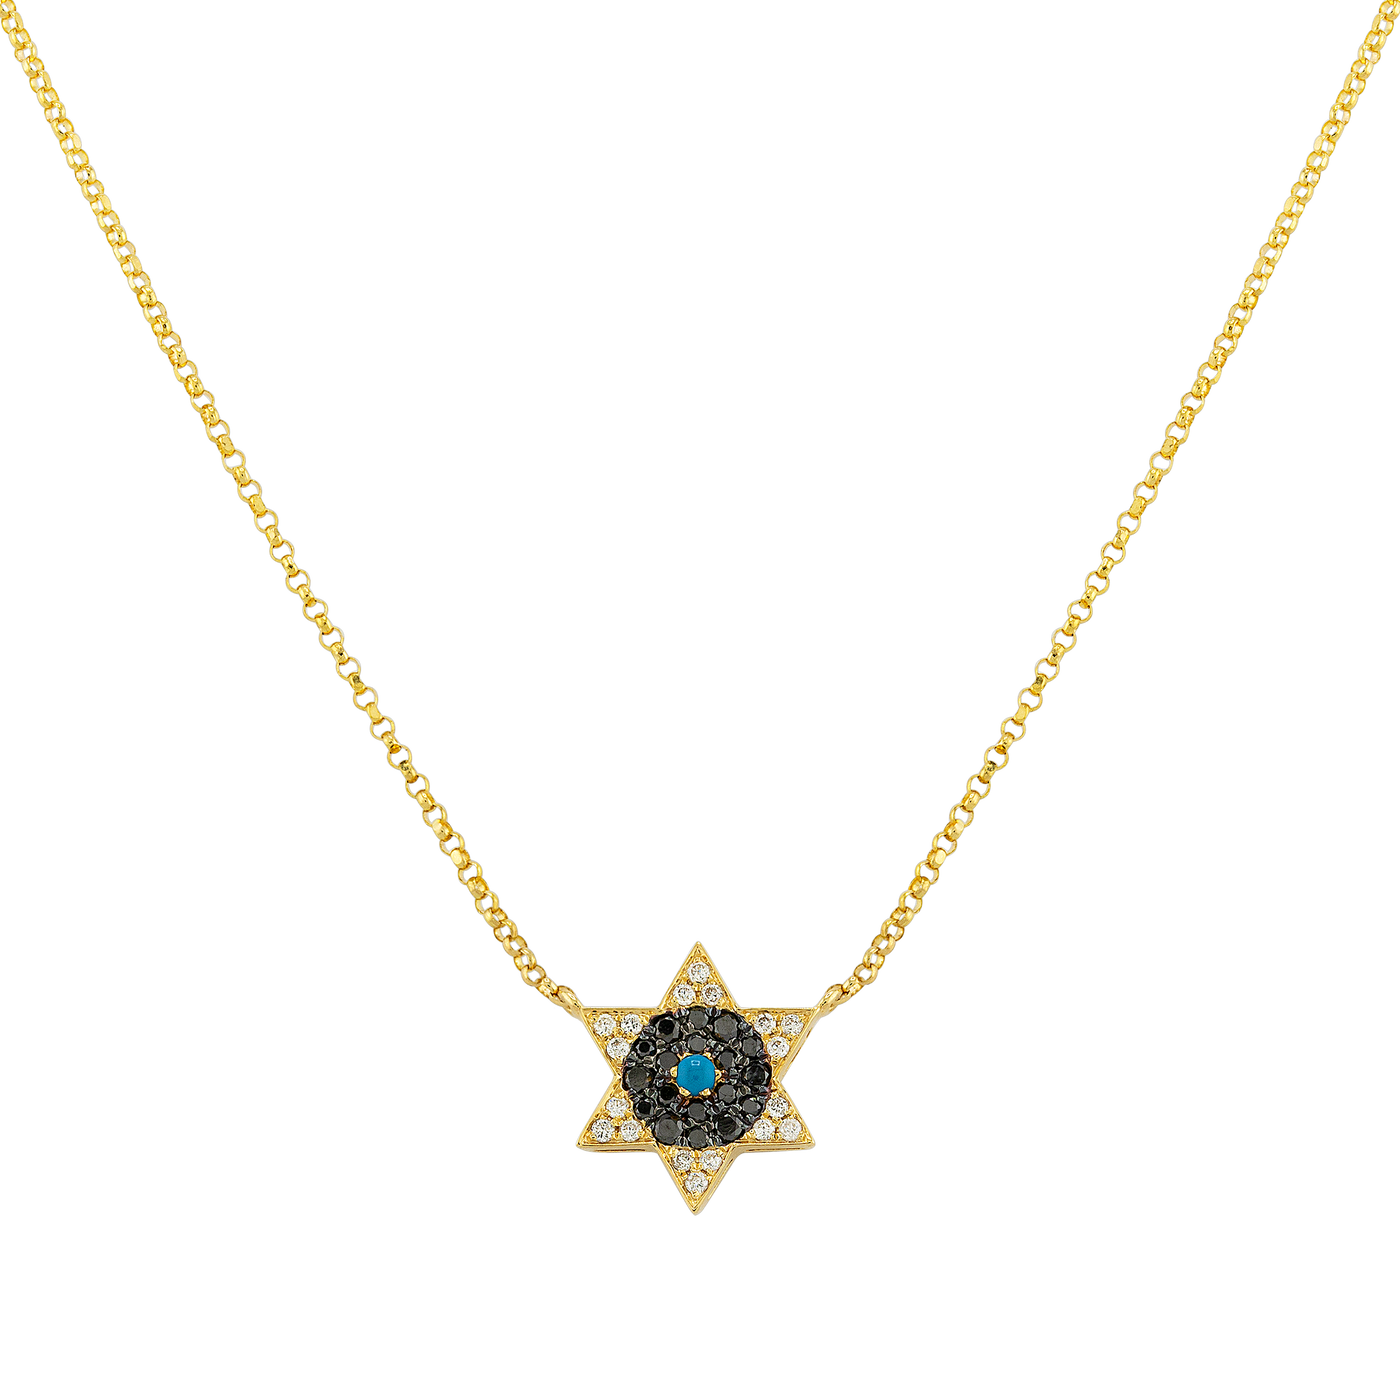 18K Yellow Gold Star of David Diamond Necklace with Turquoise 0.24ct. tw